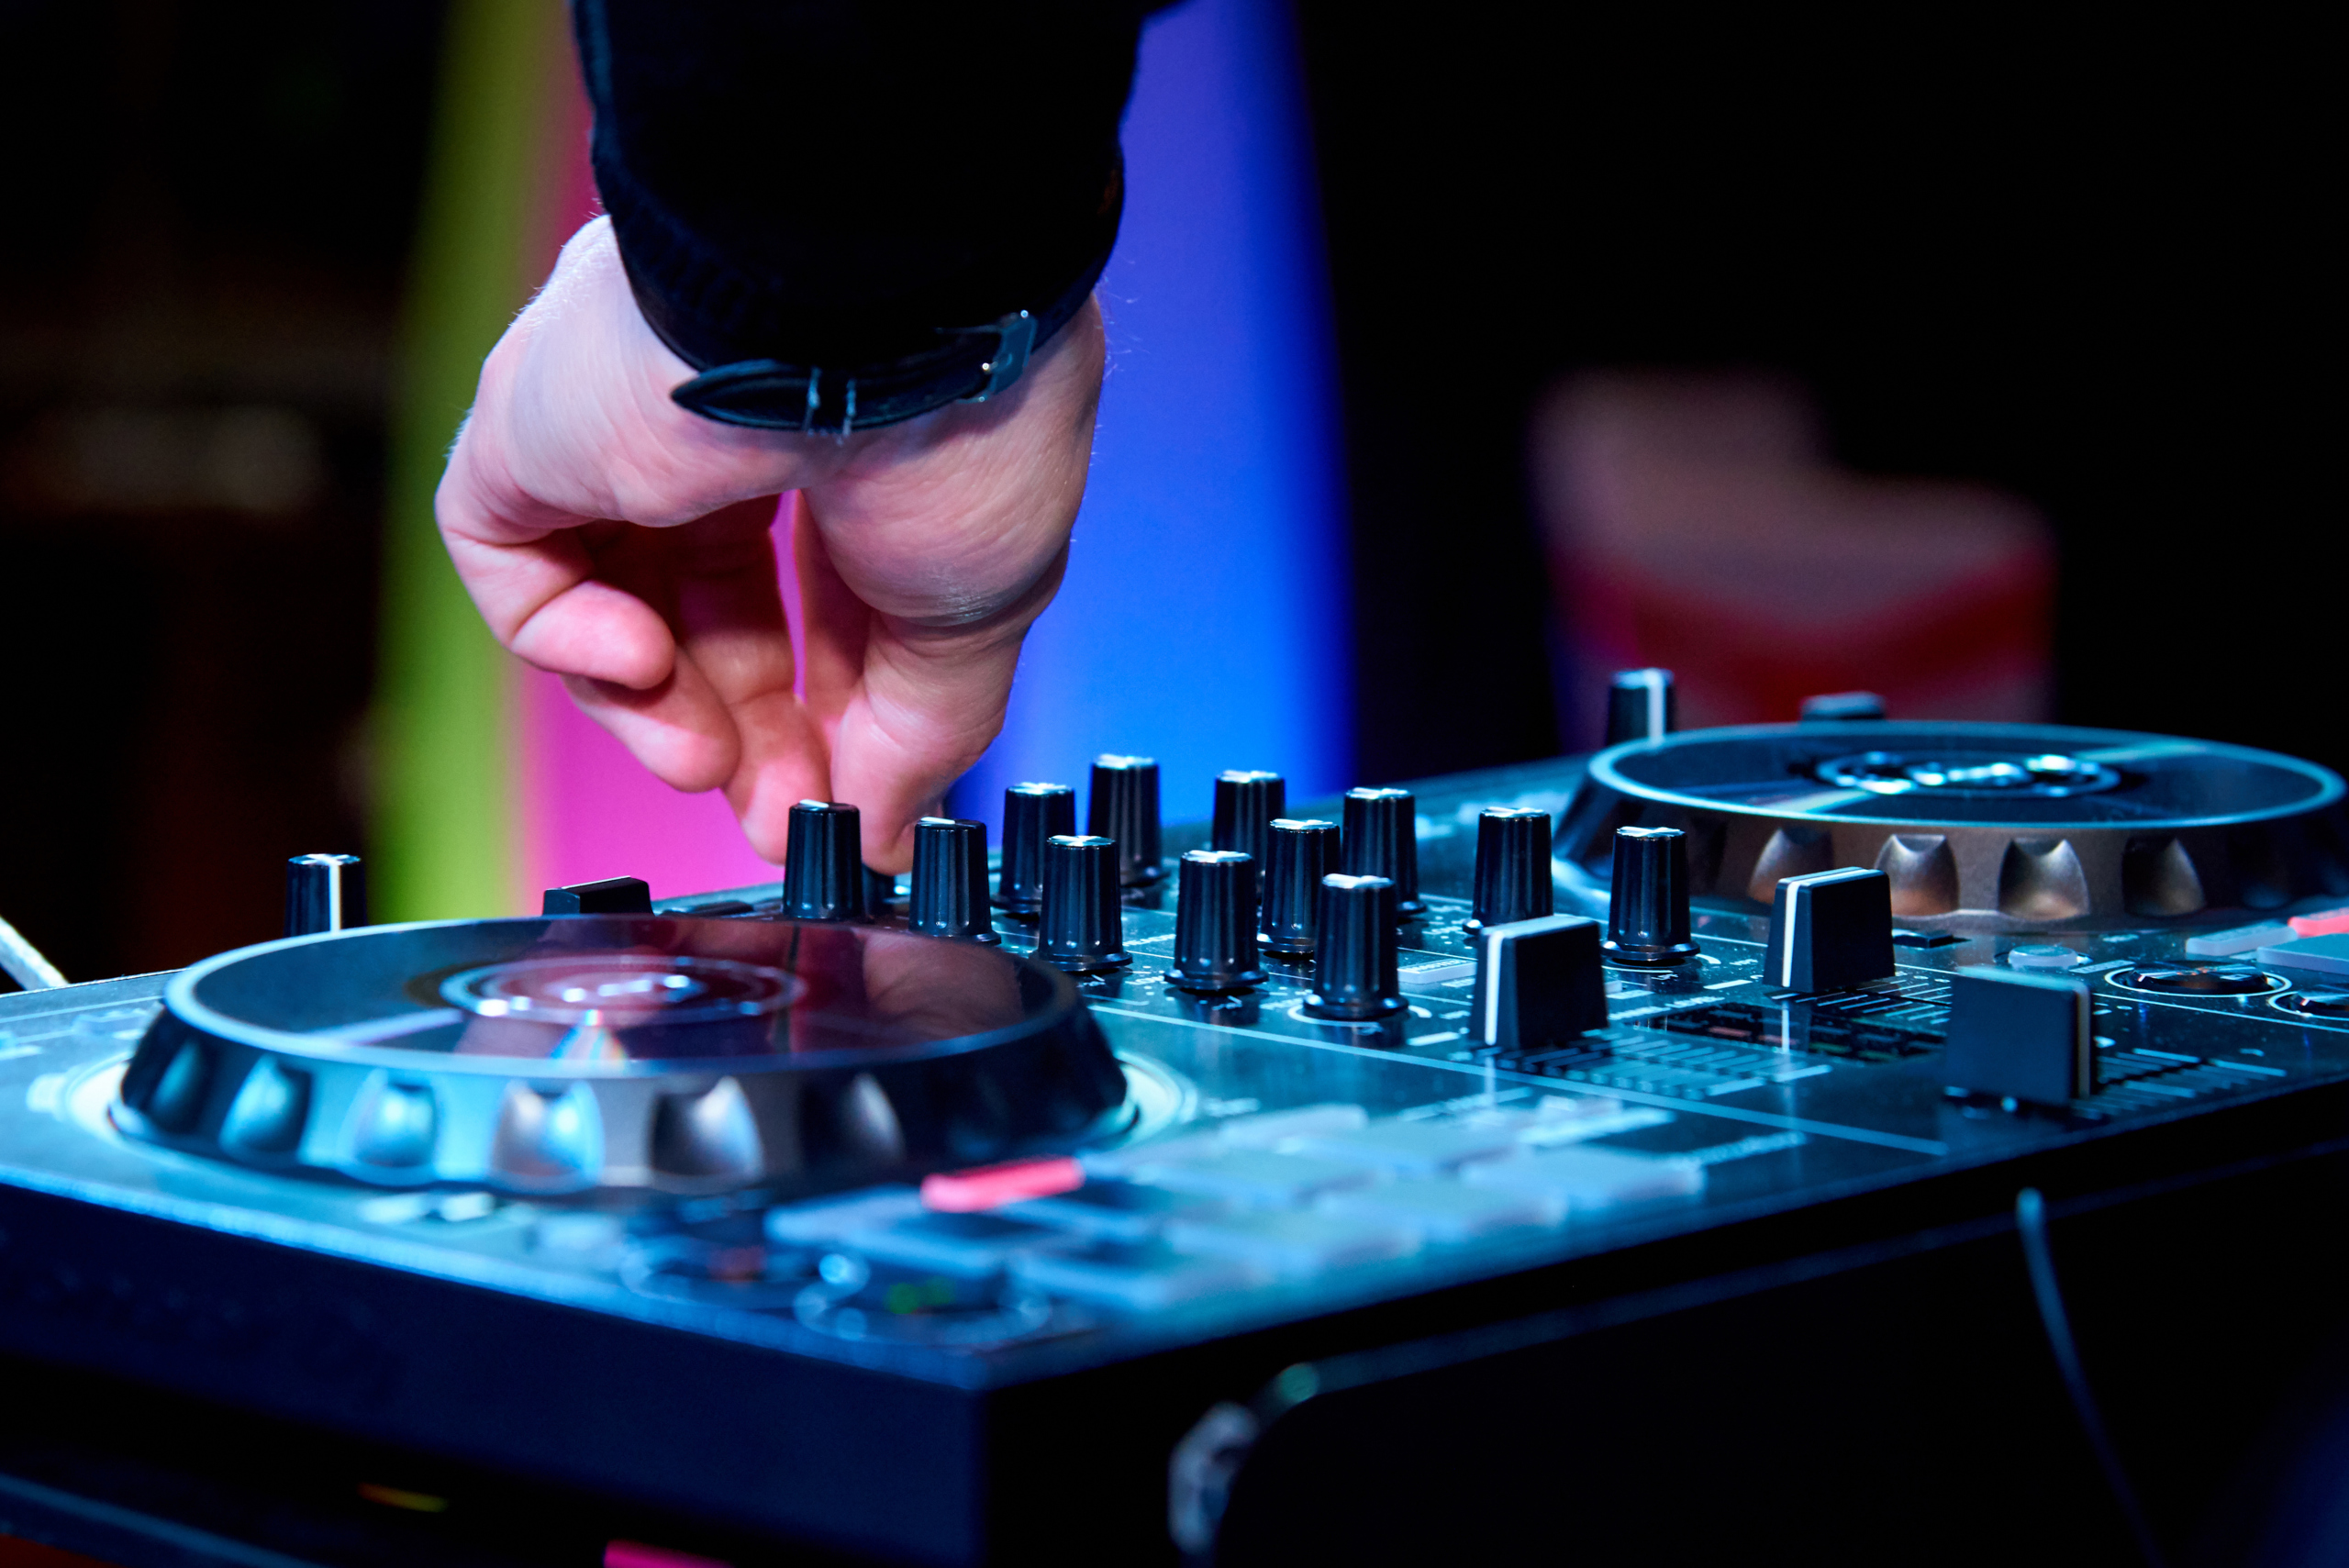 Close-up of male dj hands on a control panel under spotlights.